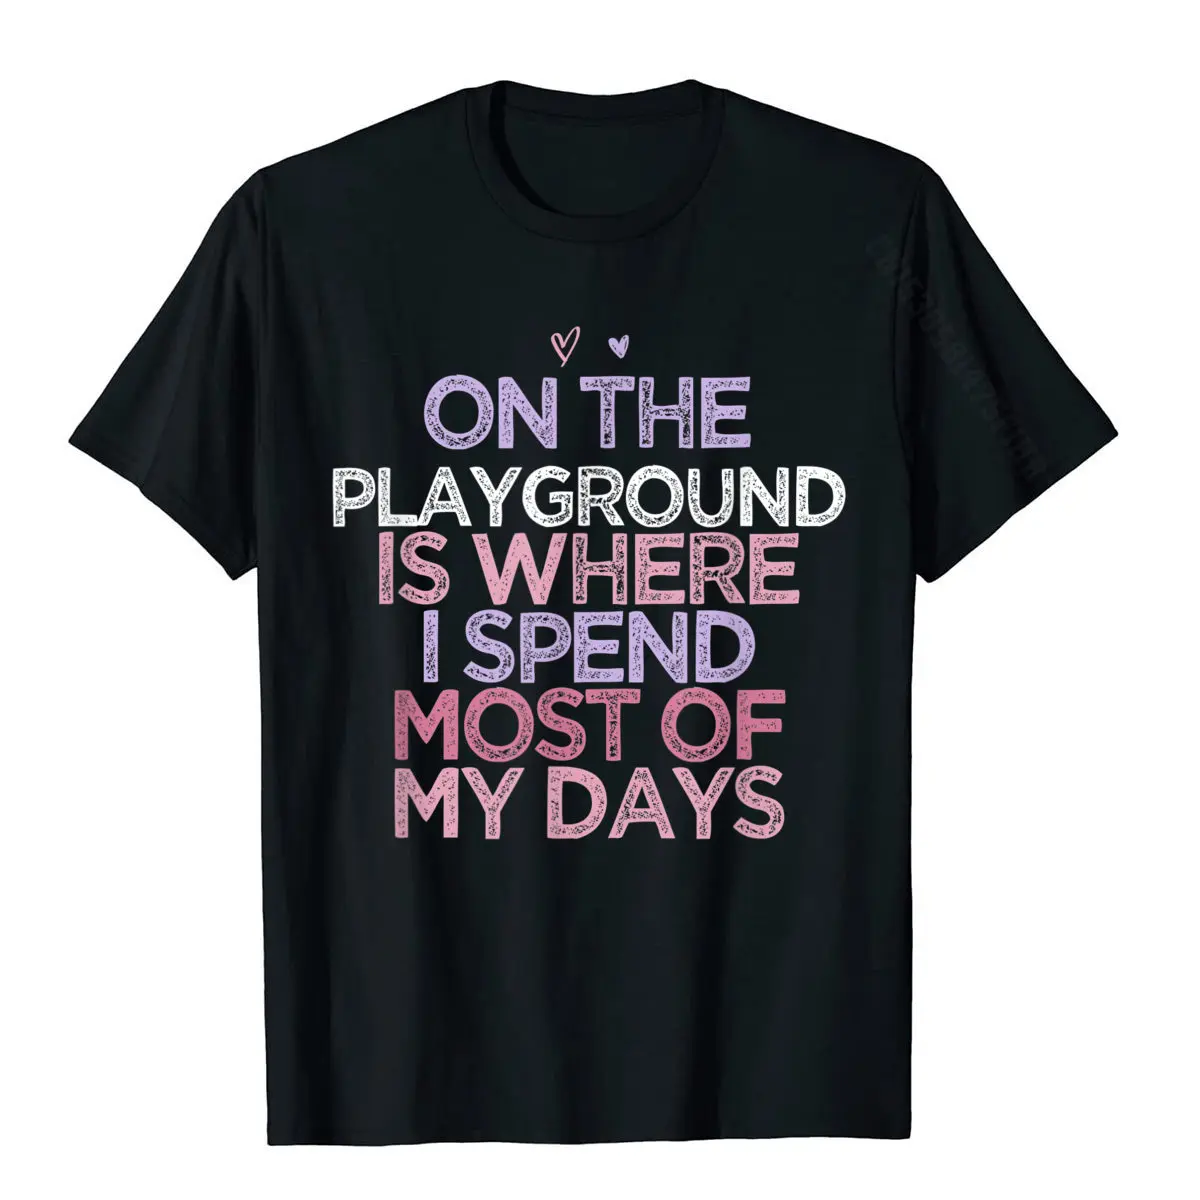 On The Playground Is Where I Spend Most Of My Days T-Shirt Cotton T Shirt For Adult Printed Tops & Tees Fashion Crazy